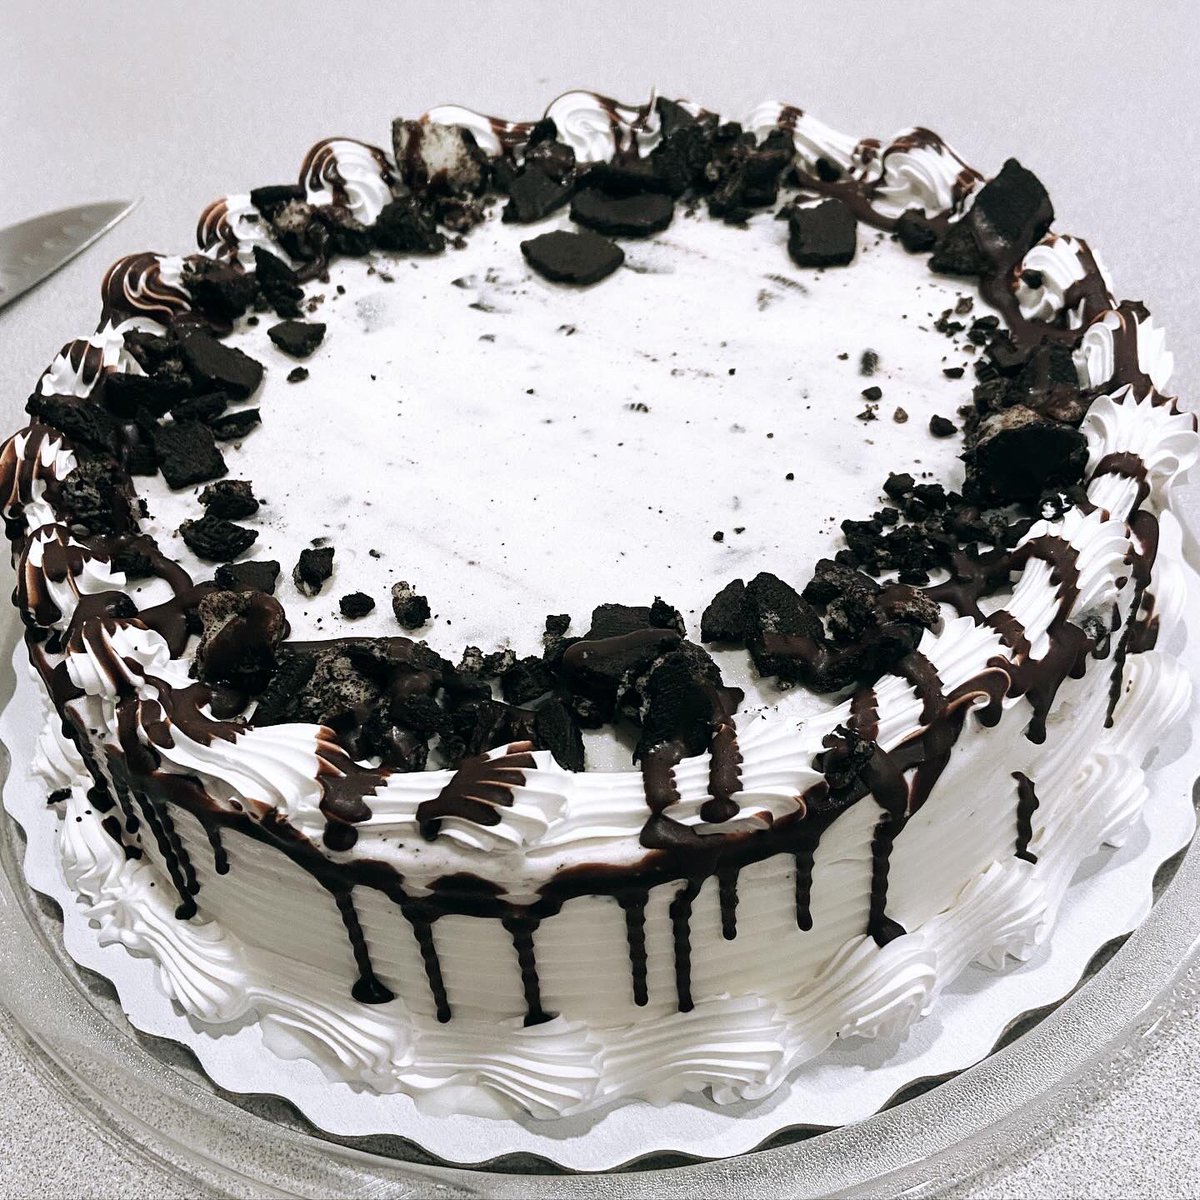 A New Joy: Oreo Ice Cream CAKE! What is a new joy that you have discovered recently? #littlejoys #icecreamcake #dairyqueencakes #oreos #celebration #happythings #foodstagram #desserts